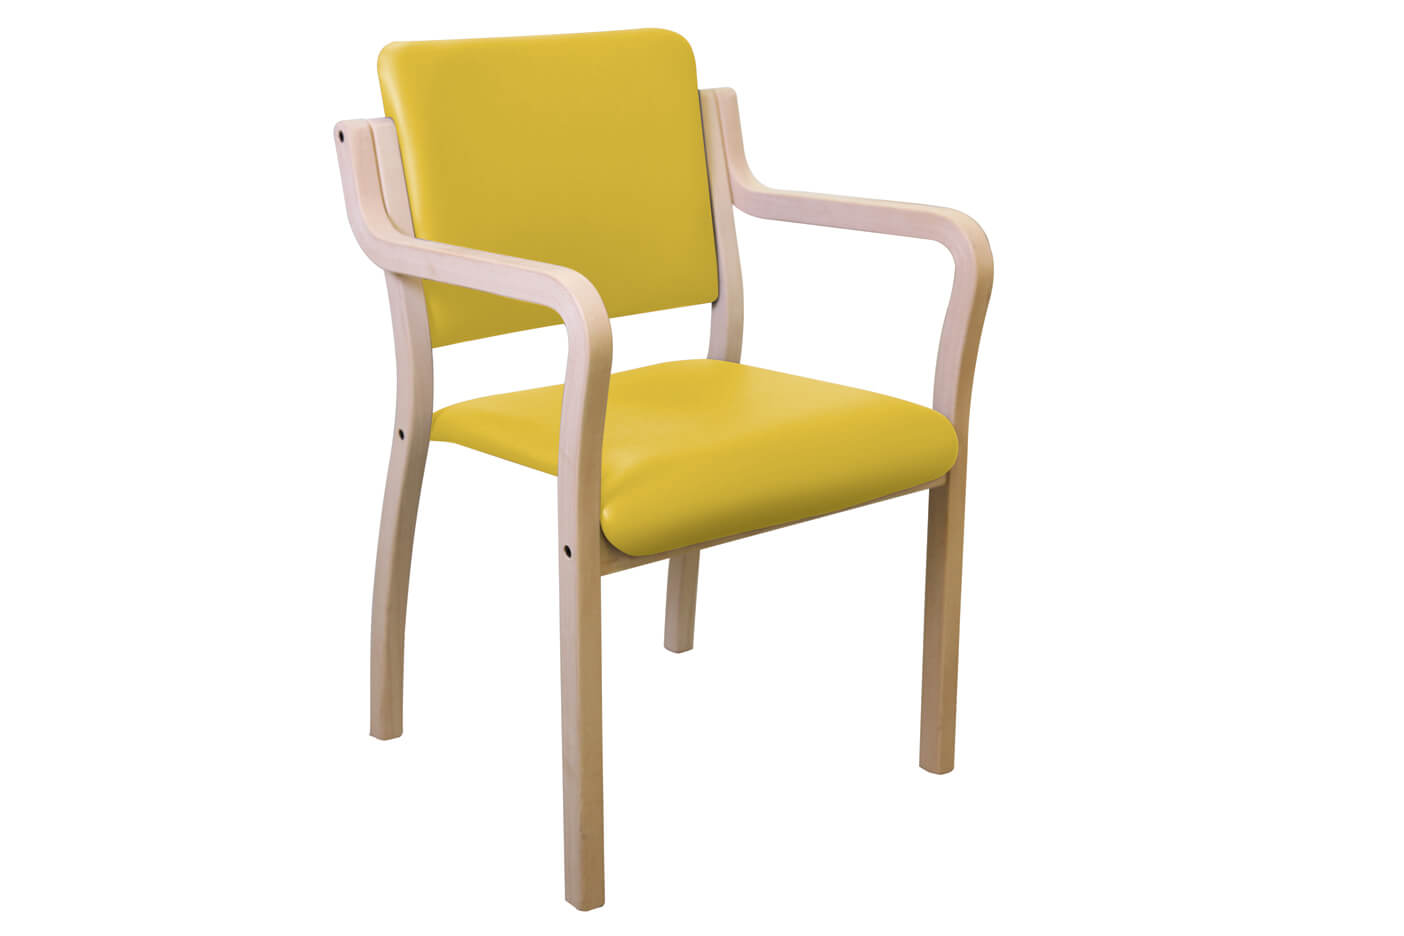 Sunflower - Genesis Easy Access Chair with arms